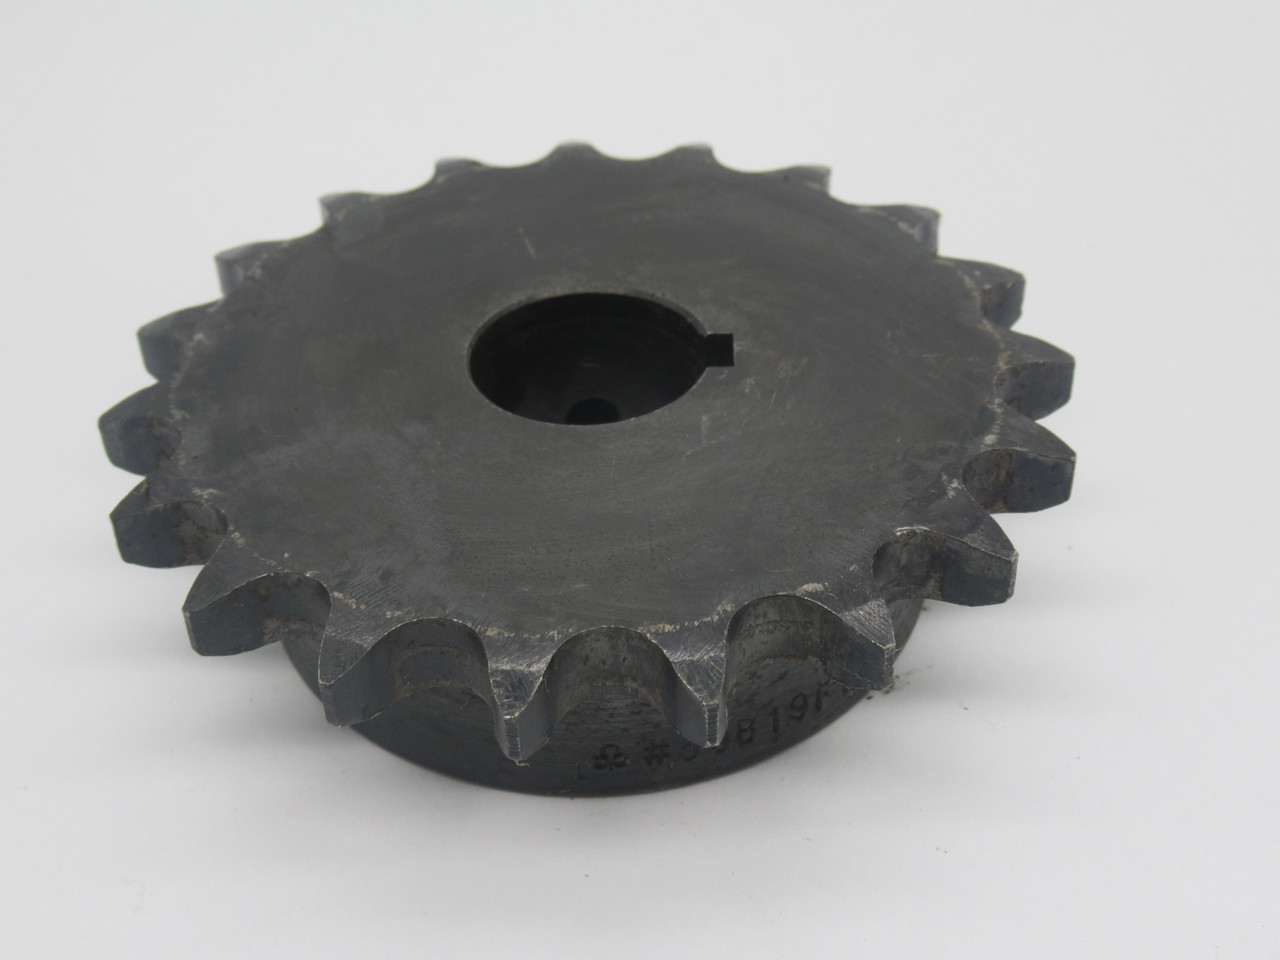 Generic 50B19F1 Roller Chain Sprocket 1" Bore 19 Teeth 50 Chain 5/8" Pitch USED